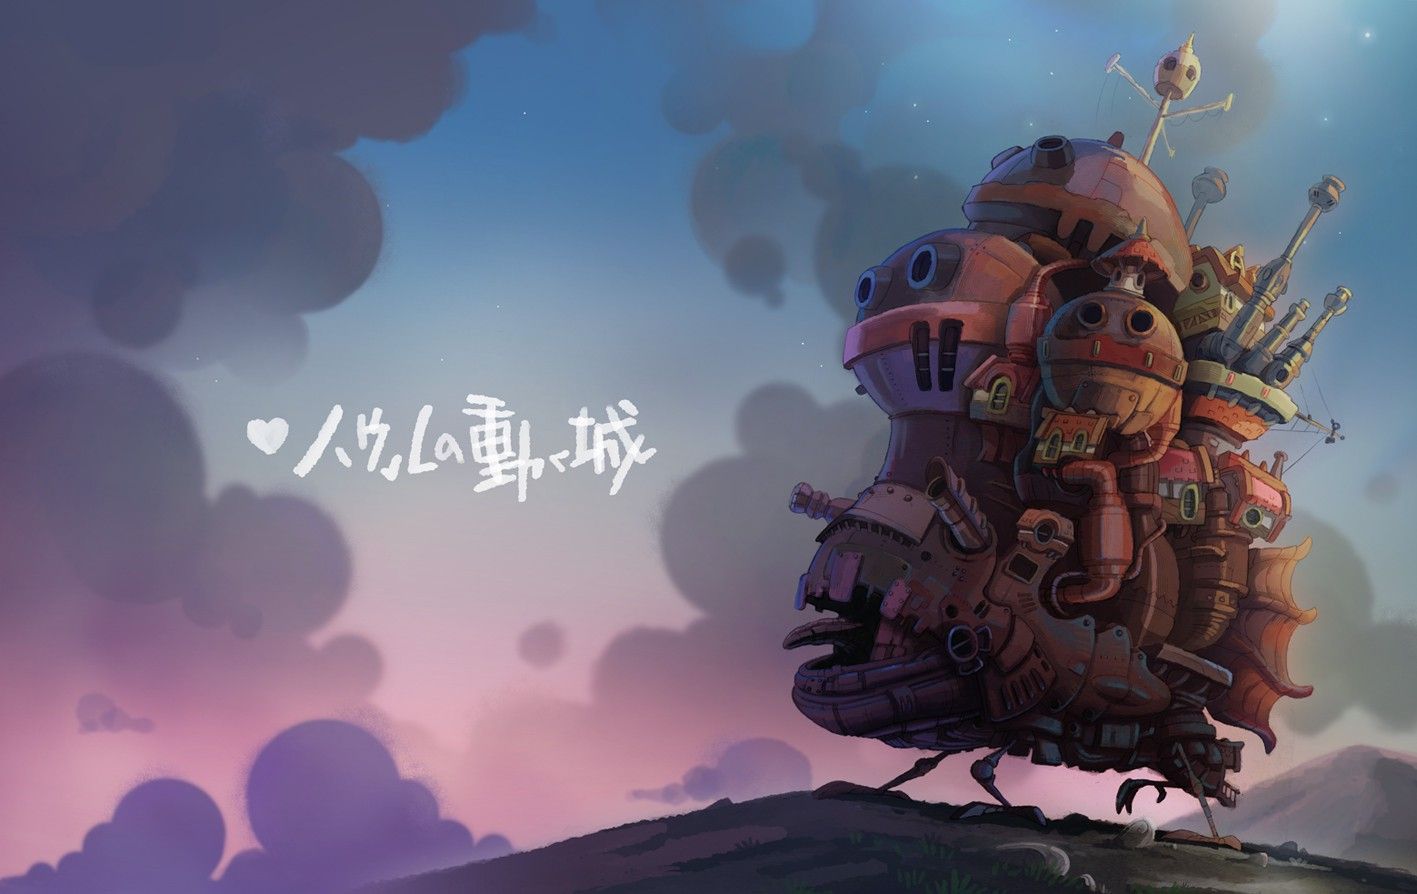 Free download Castles Anime Howl Moving Castle Ghibli Chateau Hauru HD Wallpapers [1417x894] for your Desktop, Mobile & Tablet